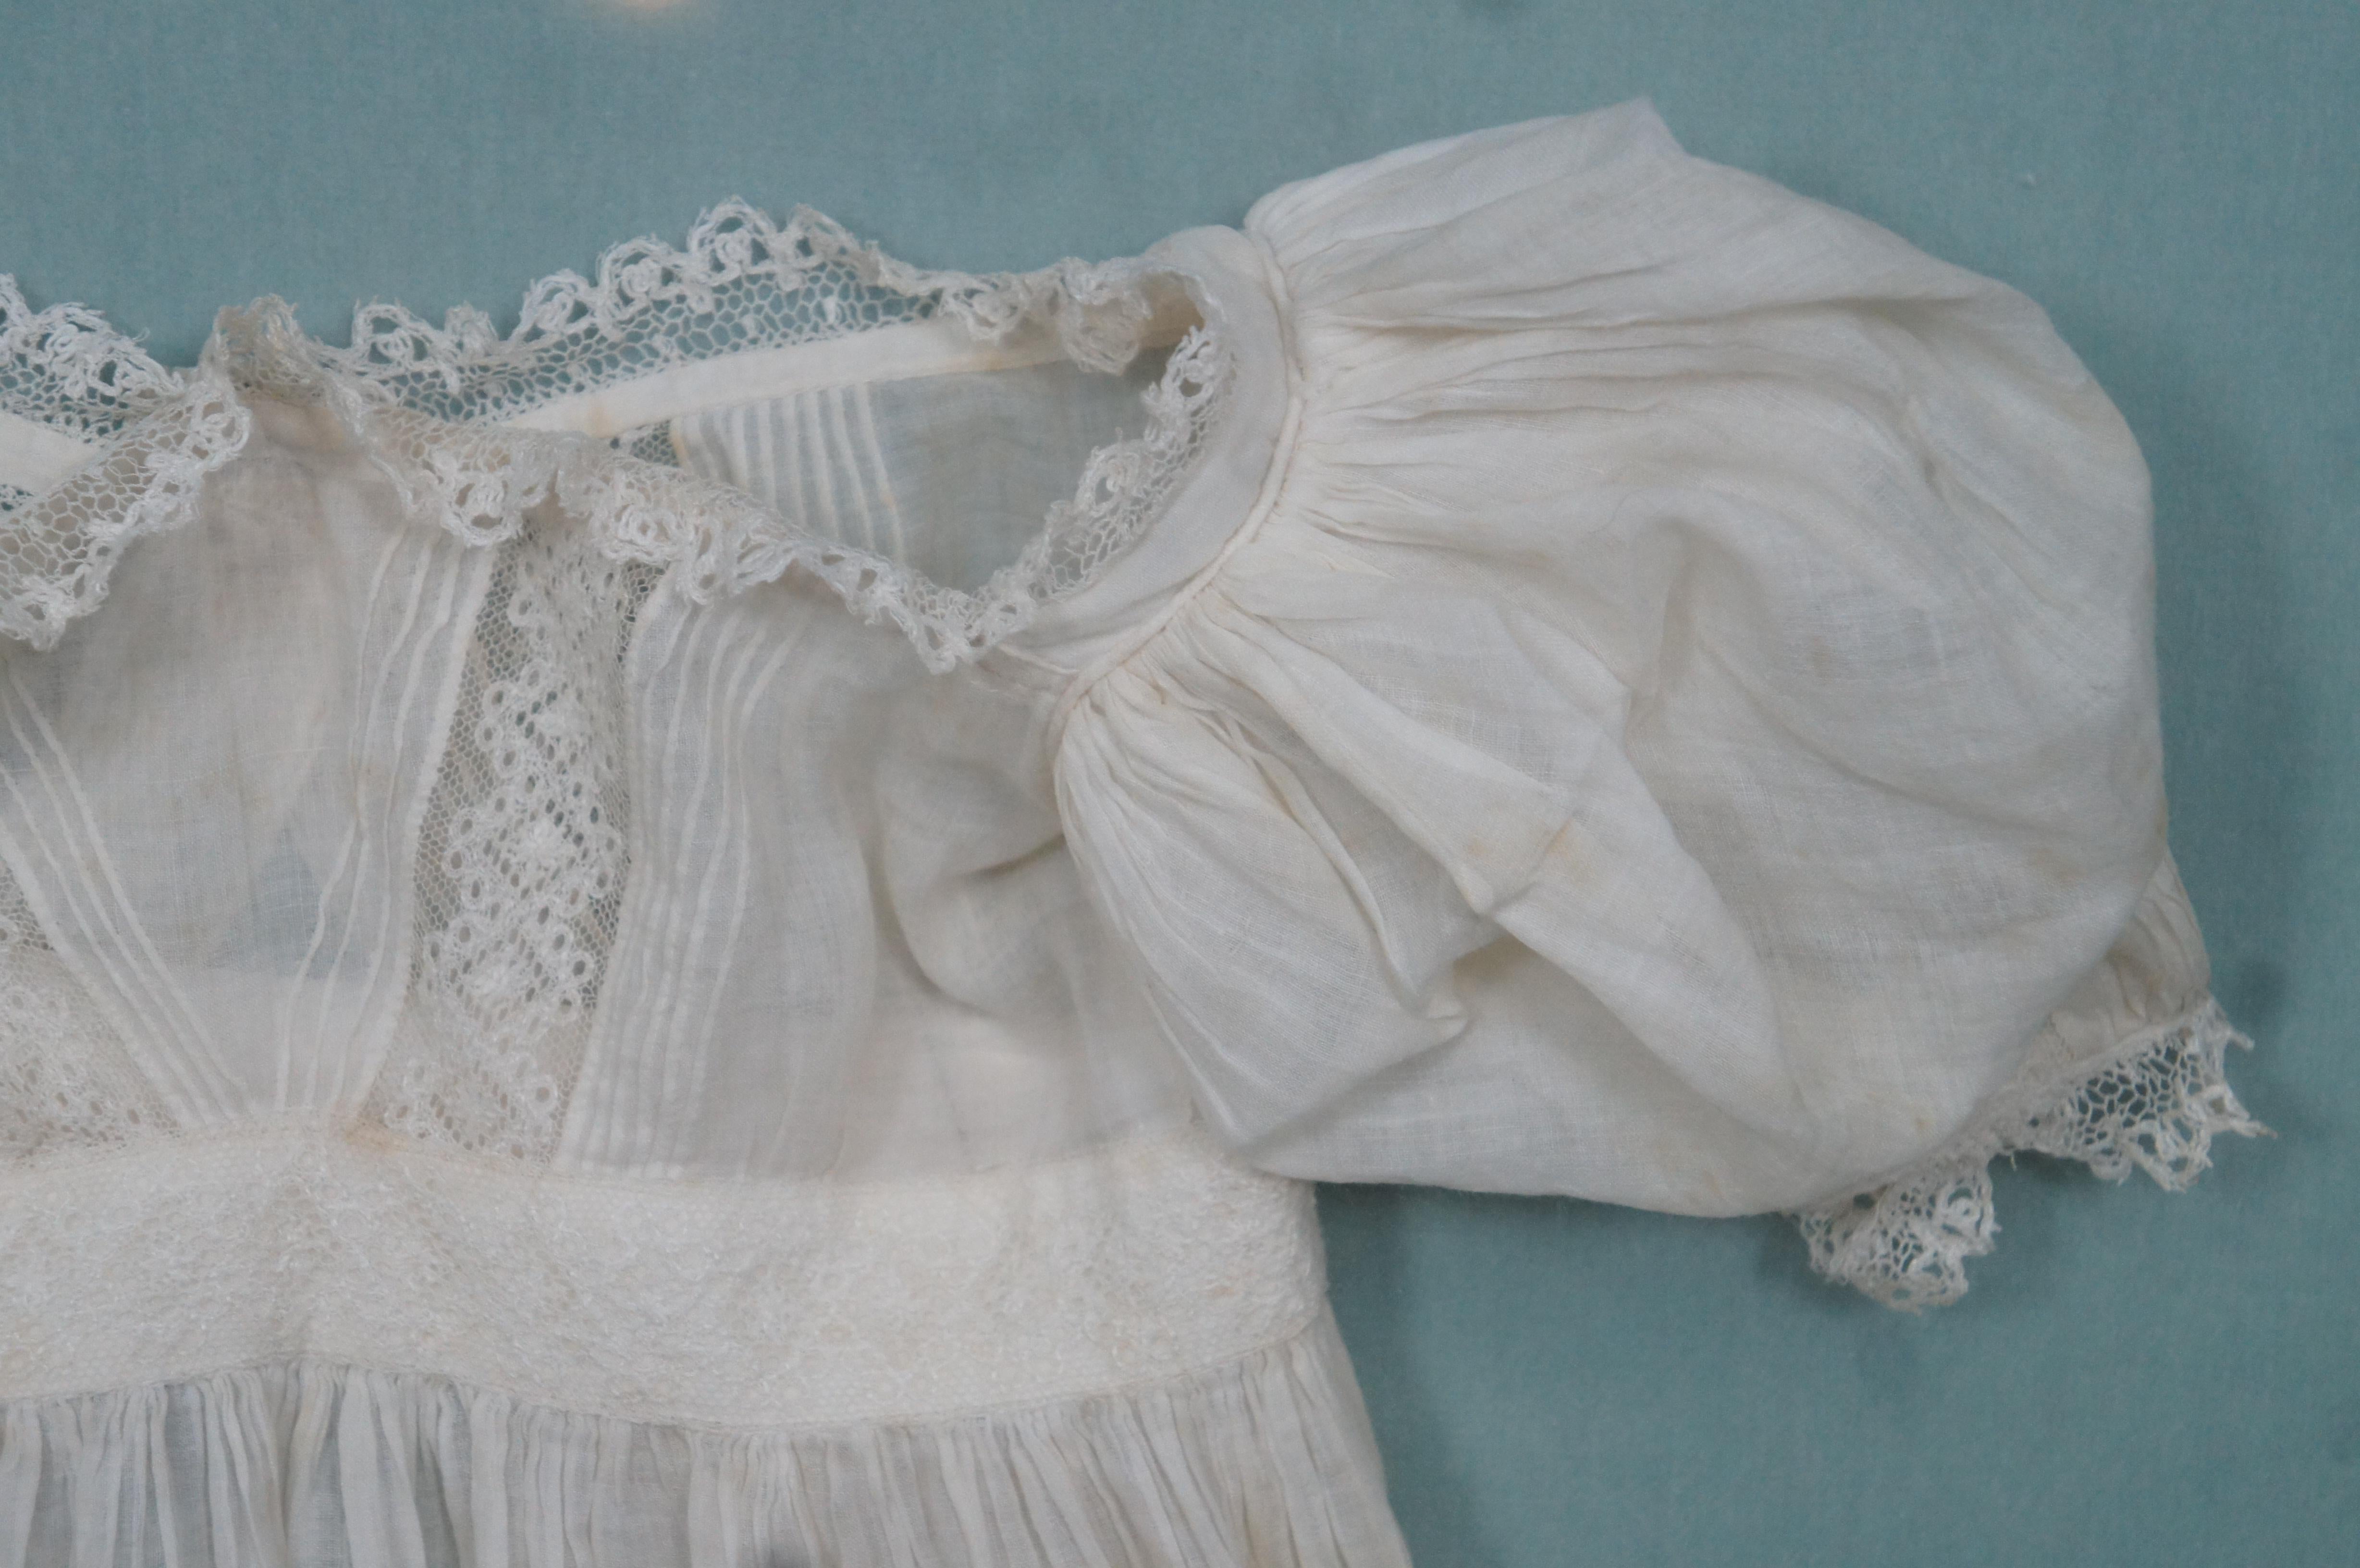 Antique 19th Century Infant Christening Gown Lace Baby Dress Shadowbox For Sale 3